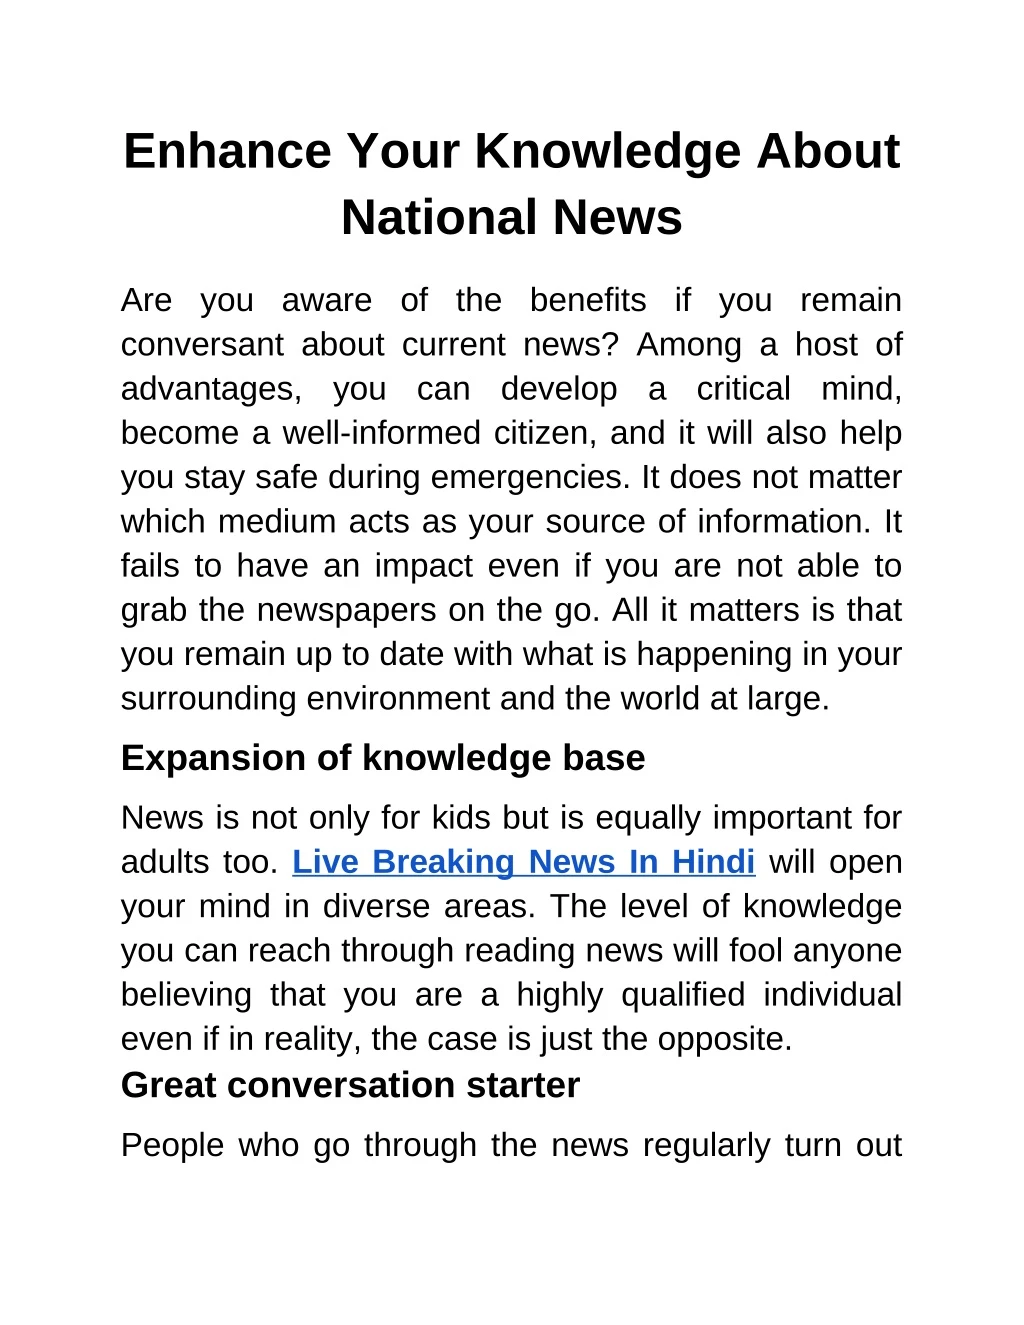 enhance your knowledge about national news